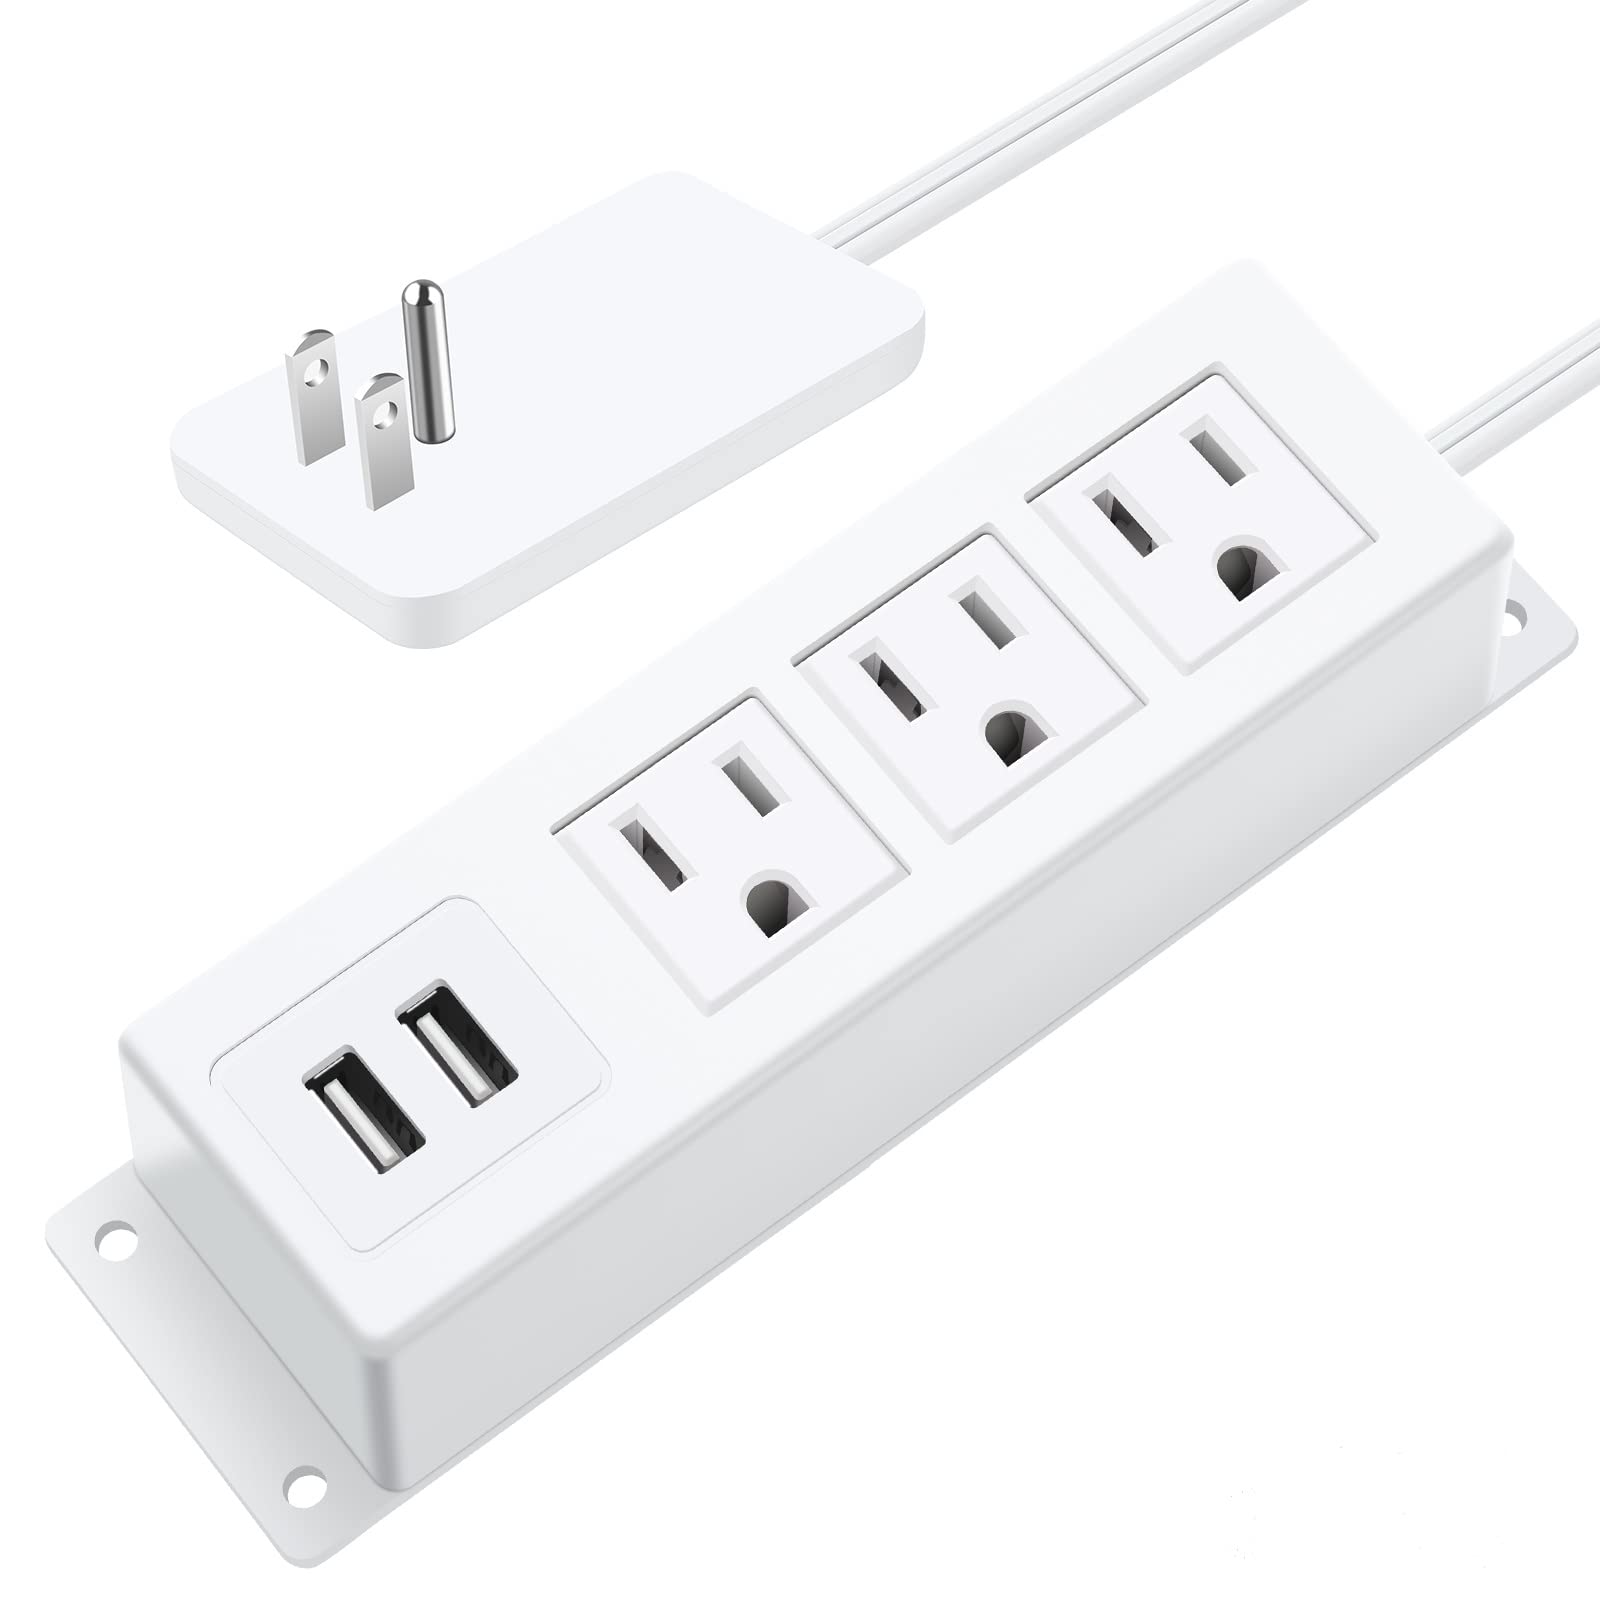 Flat Plug Power Strip Individual Switches, Extension Cord 6 feet, 4  Outlets, Surge Protector 300J, White, Baby Proof Outlet Cover 